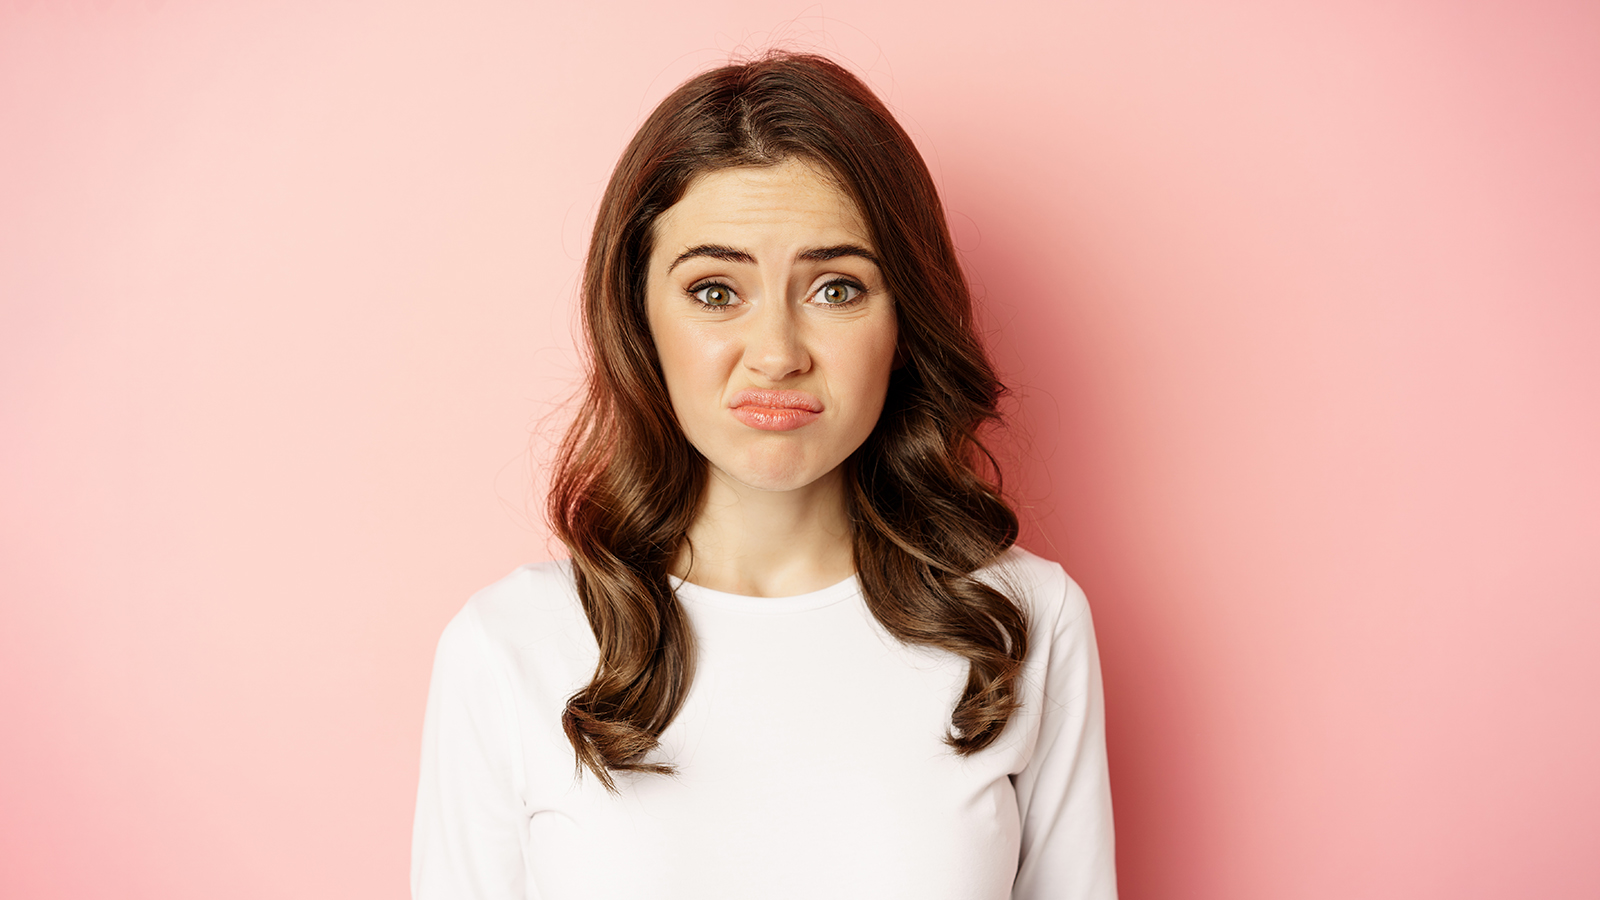 Close up portrait, face of woman cringe, grimacing disappointed, looking awkward or upset, standing over pink background